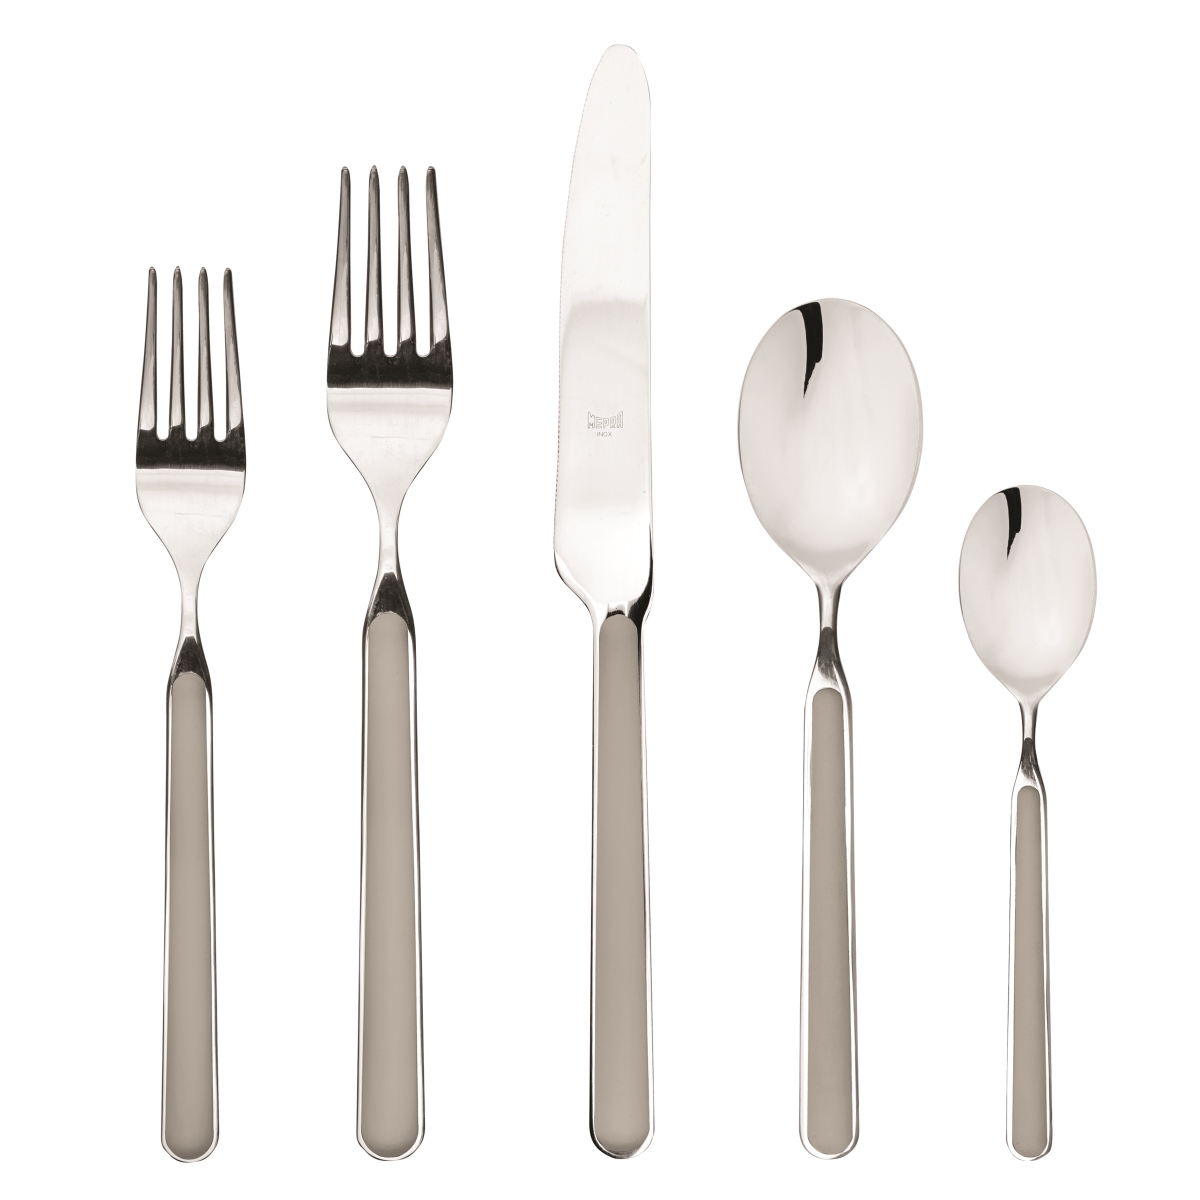 10i622005 Stainless Steel Fantasia Place Set, Vicuna - 5 Piece